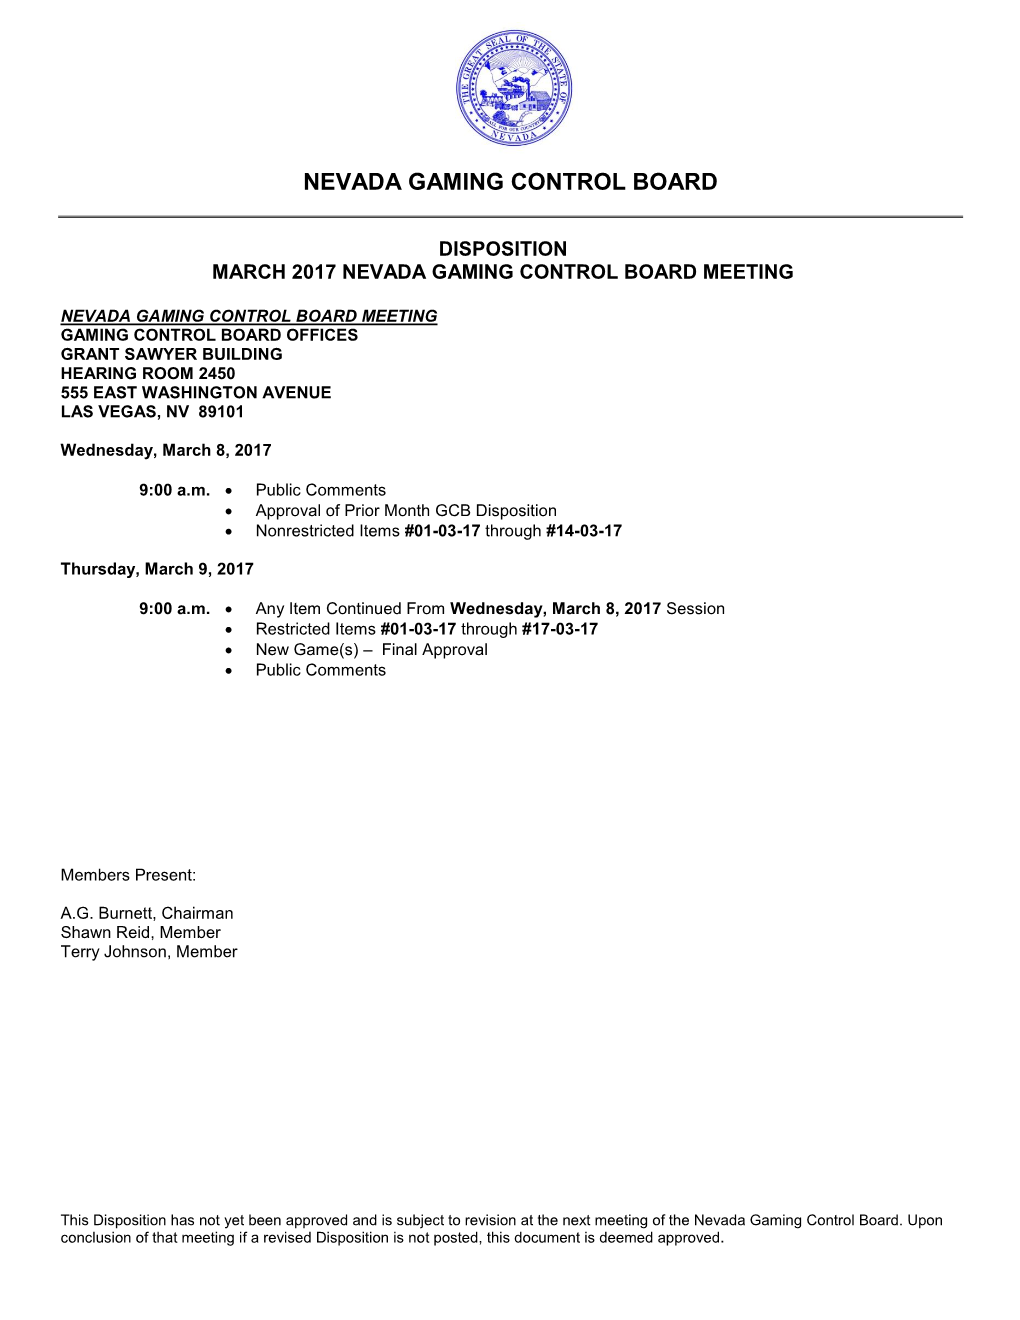 Disposition March 2017 Nevada Gaming Control Board Meeting